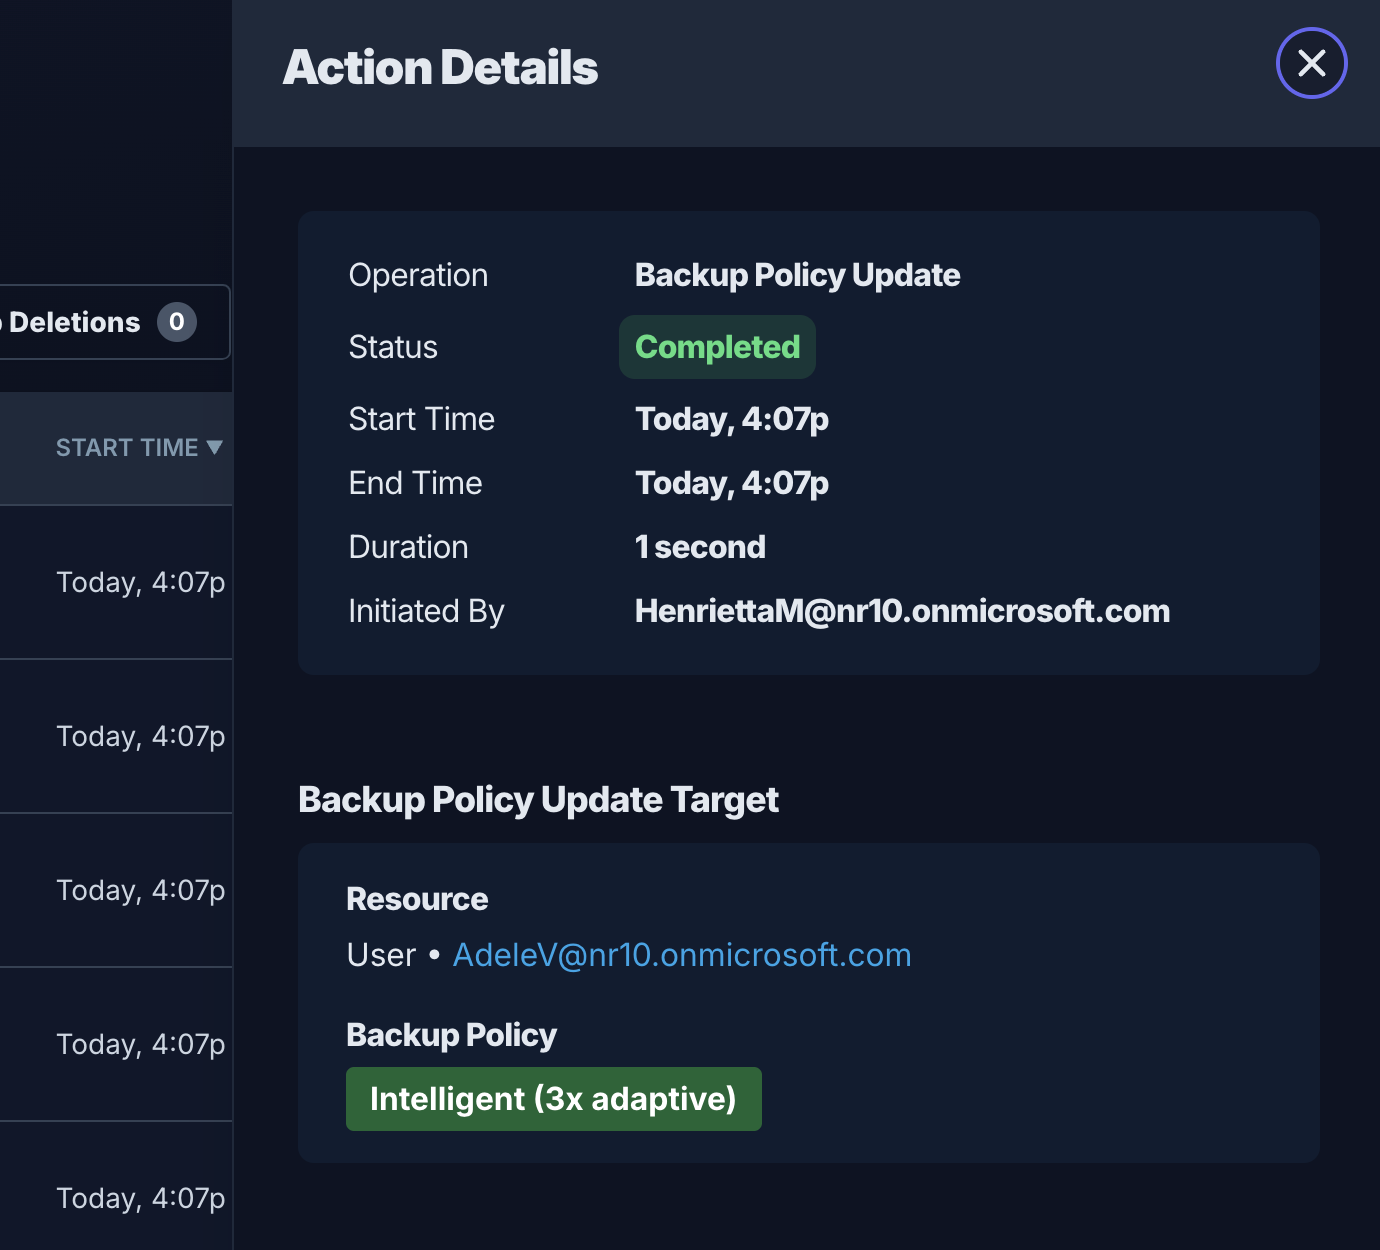 Backup policy update activity details